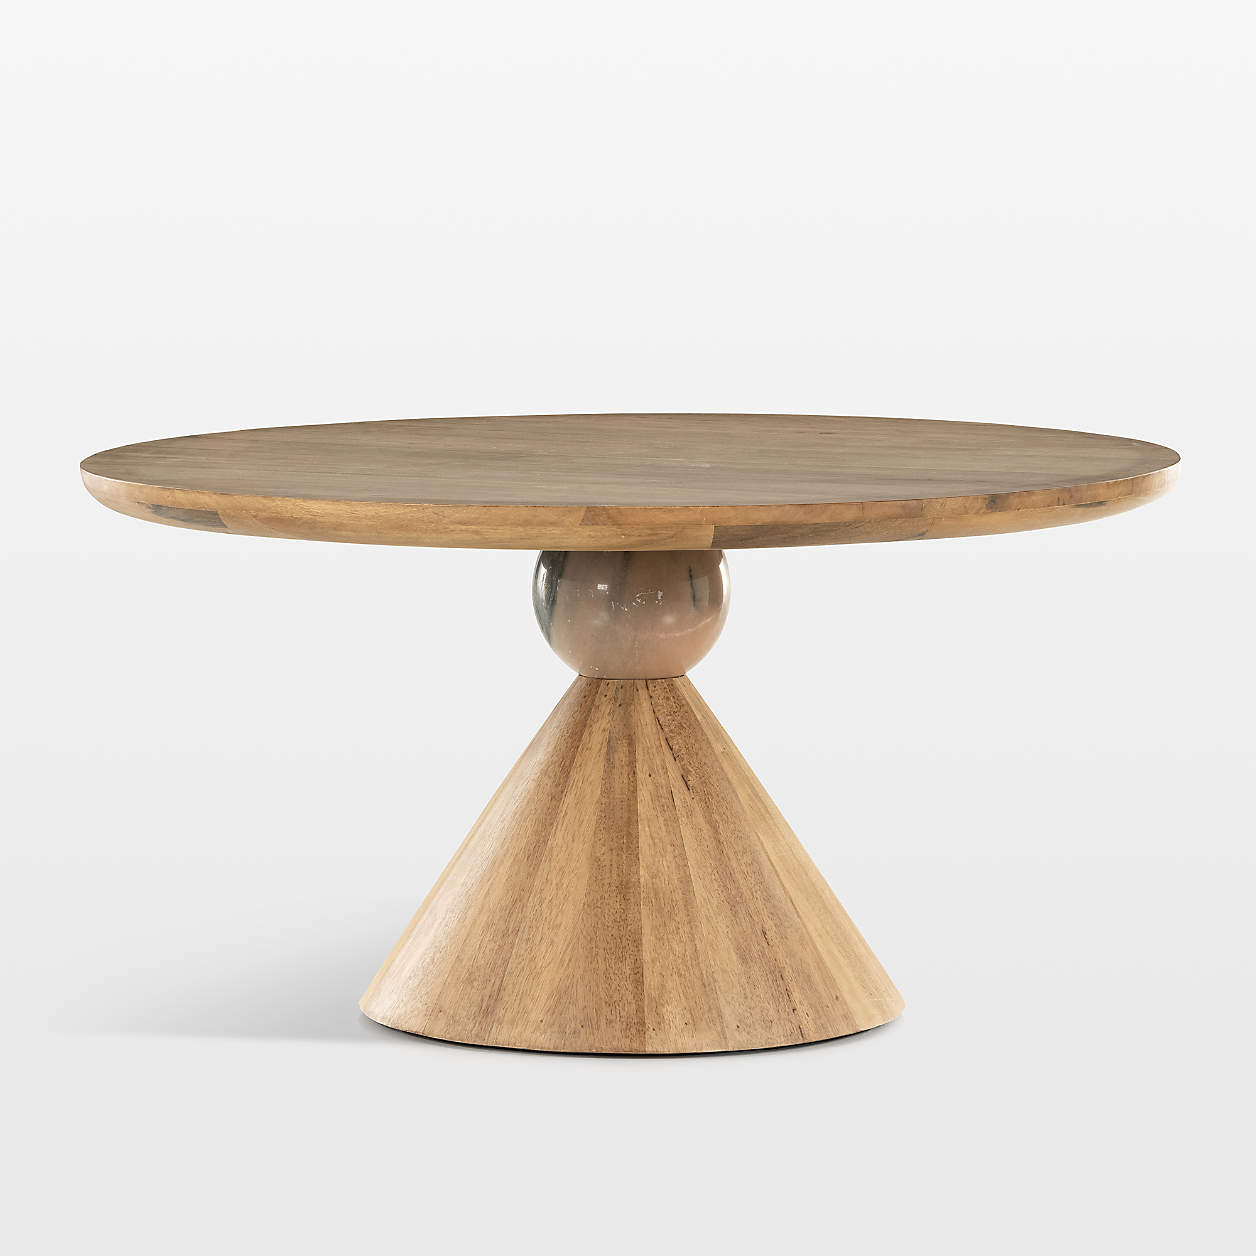 Foxx Round Natural Wood Dining Table + Reviews | Crate & Barrel